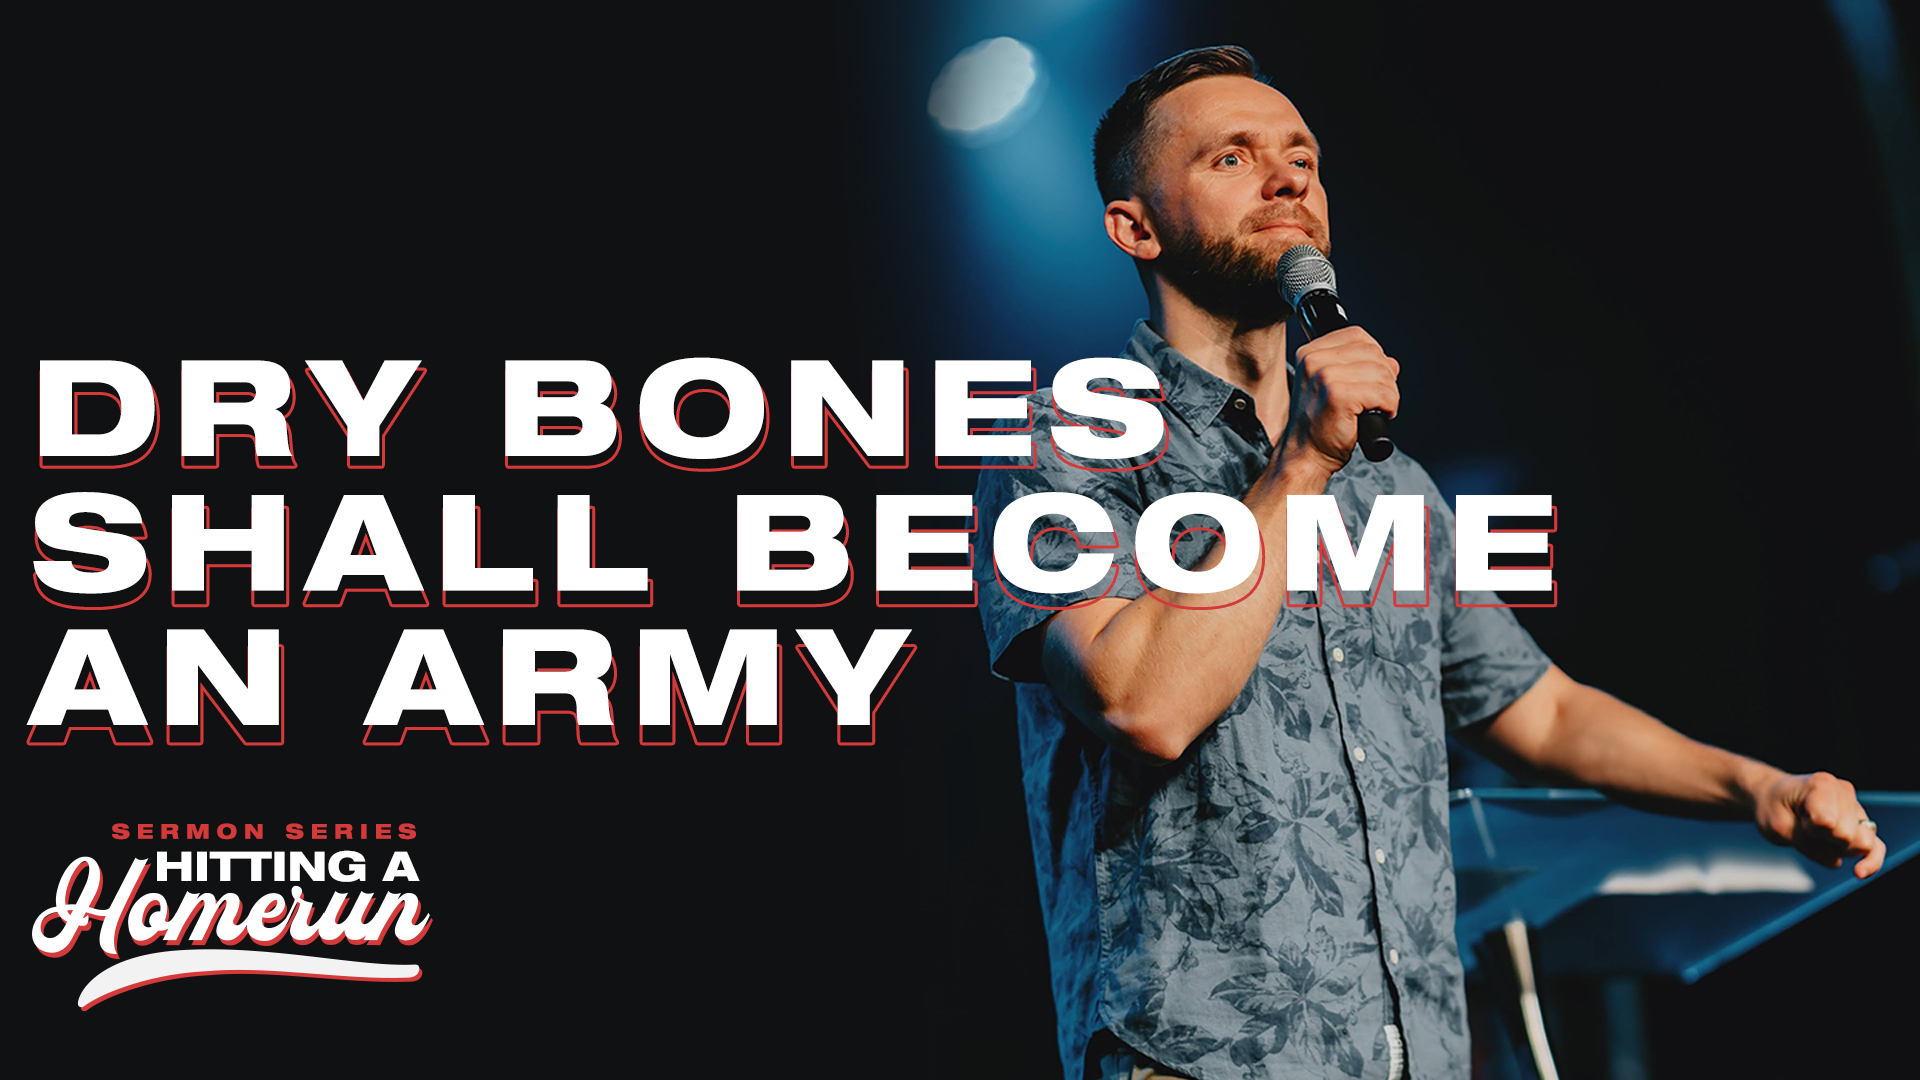 Featured image for 'Dry Bones Shall Become an Army'